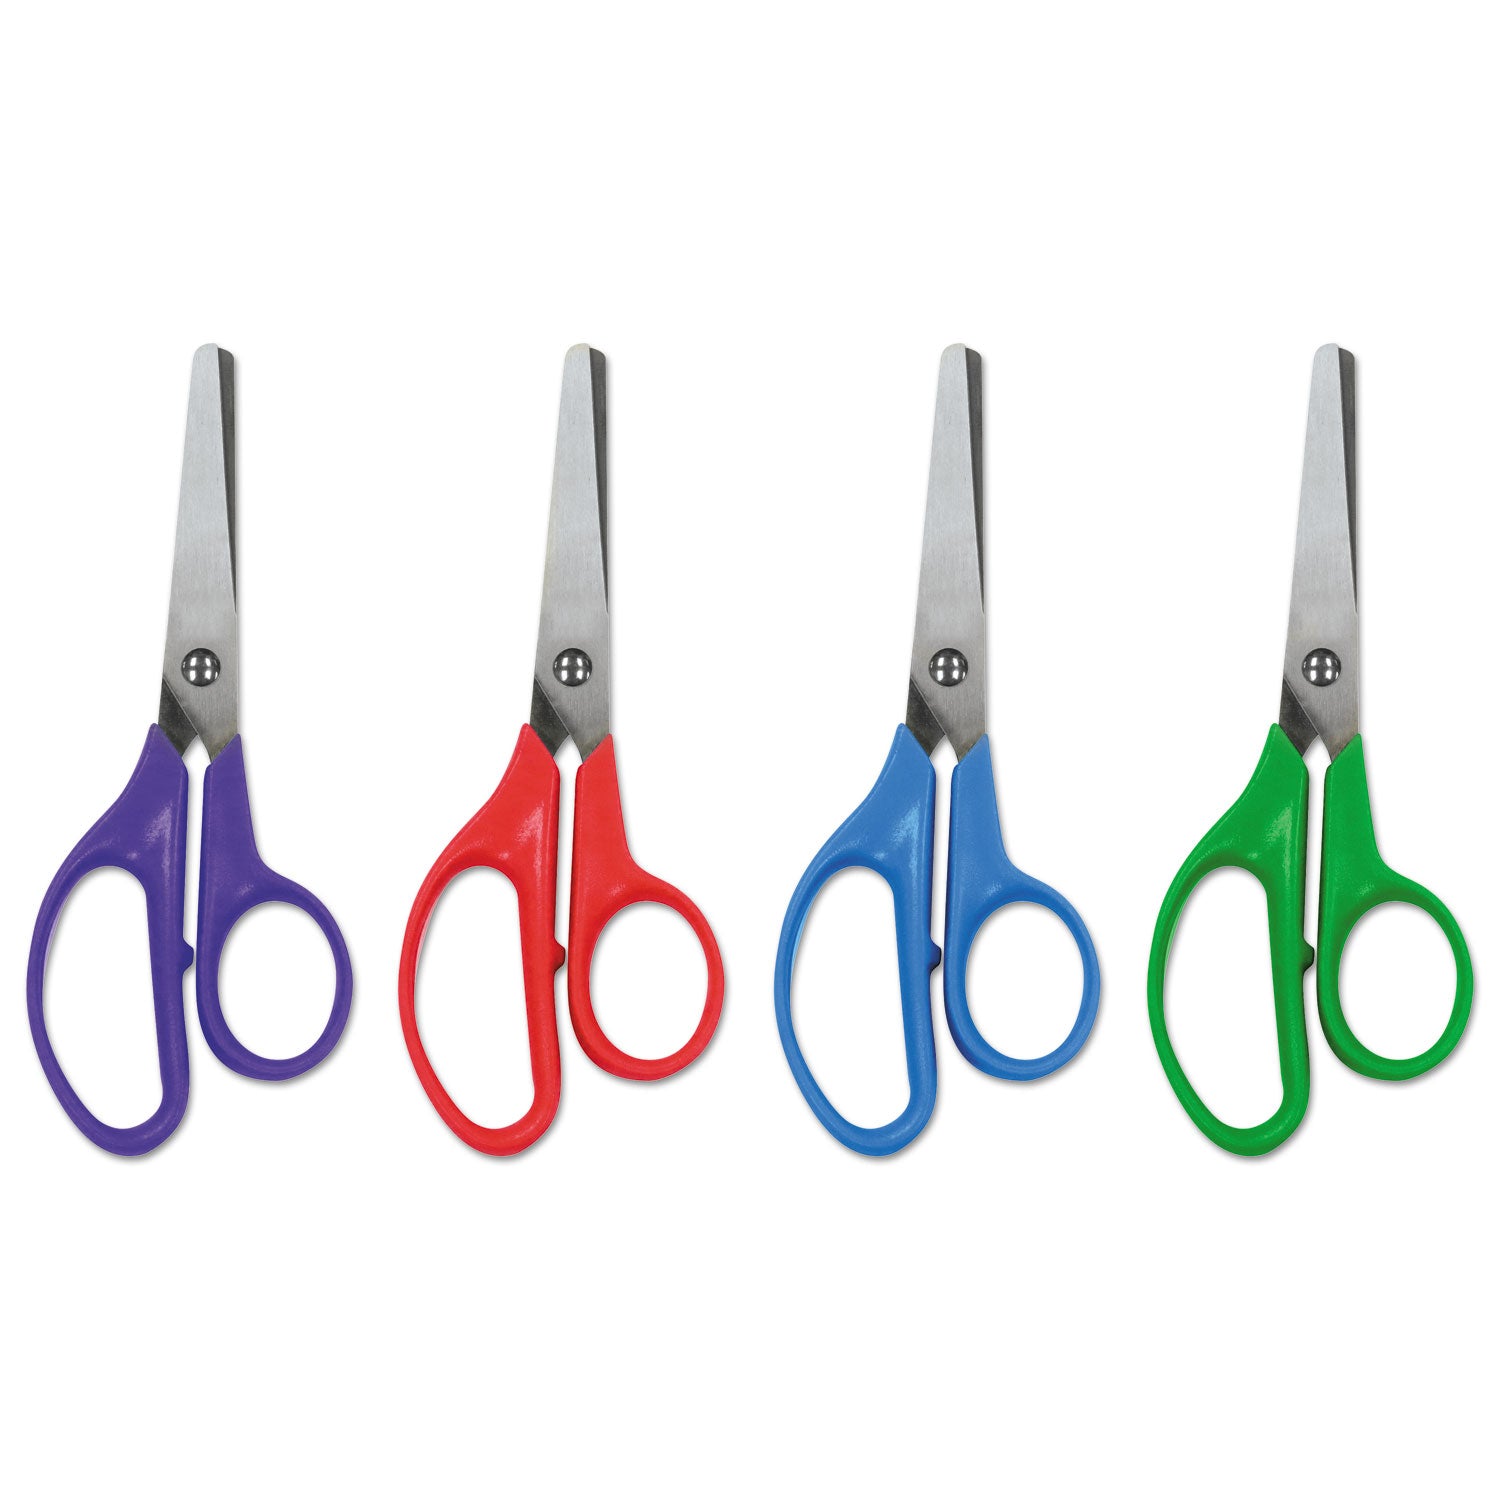 kids-scissors-rounded-tip-5-long-175-cut-length-assorted-straight-handles-12-pack_unv92023 - 2